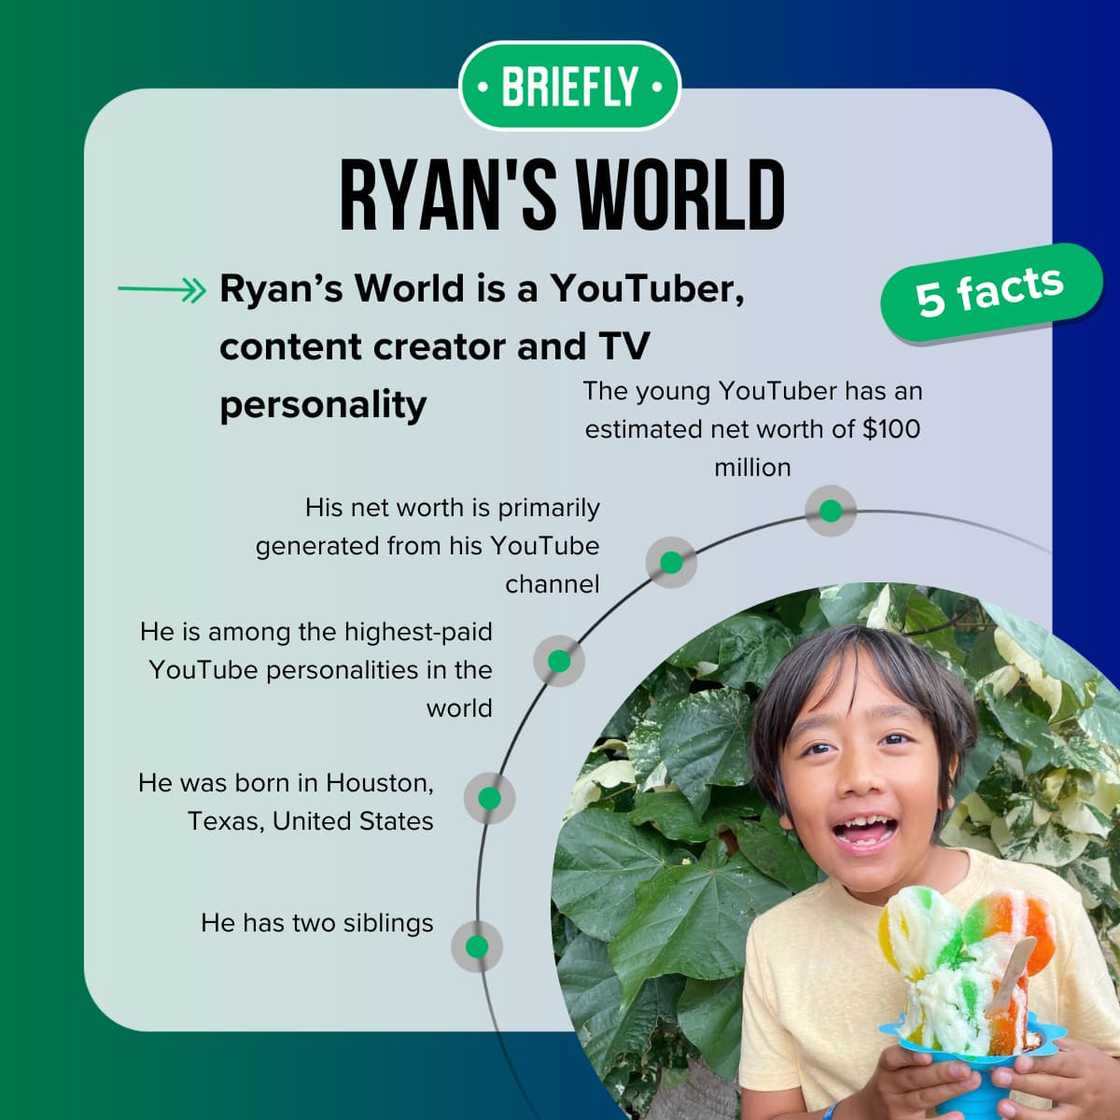 Top-5 facts about Ryan's World